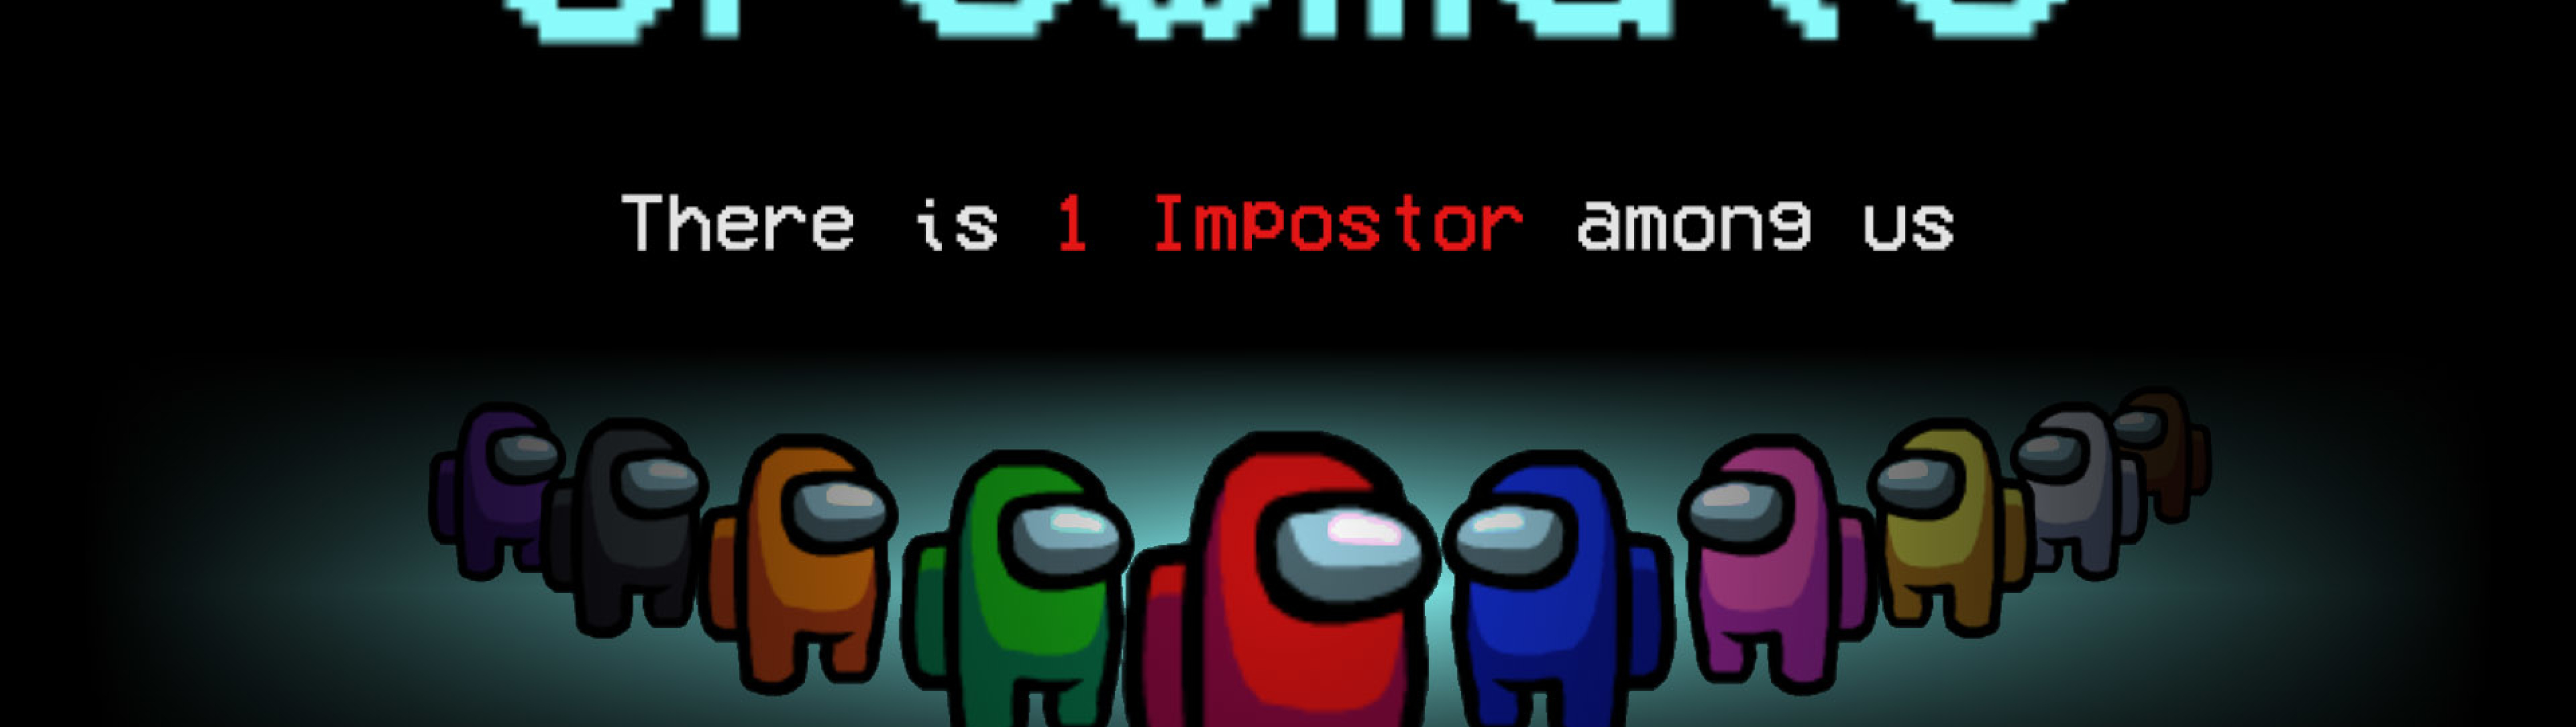 5120x1444 Resolution There Is 1 Imposter Crewmate Among Us 5120x1444